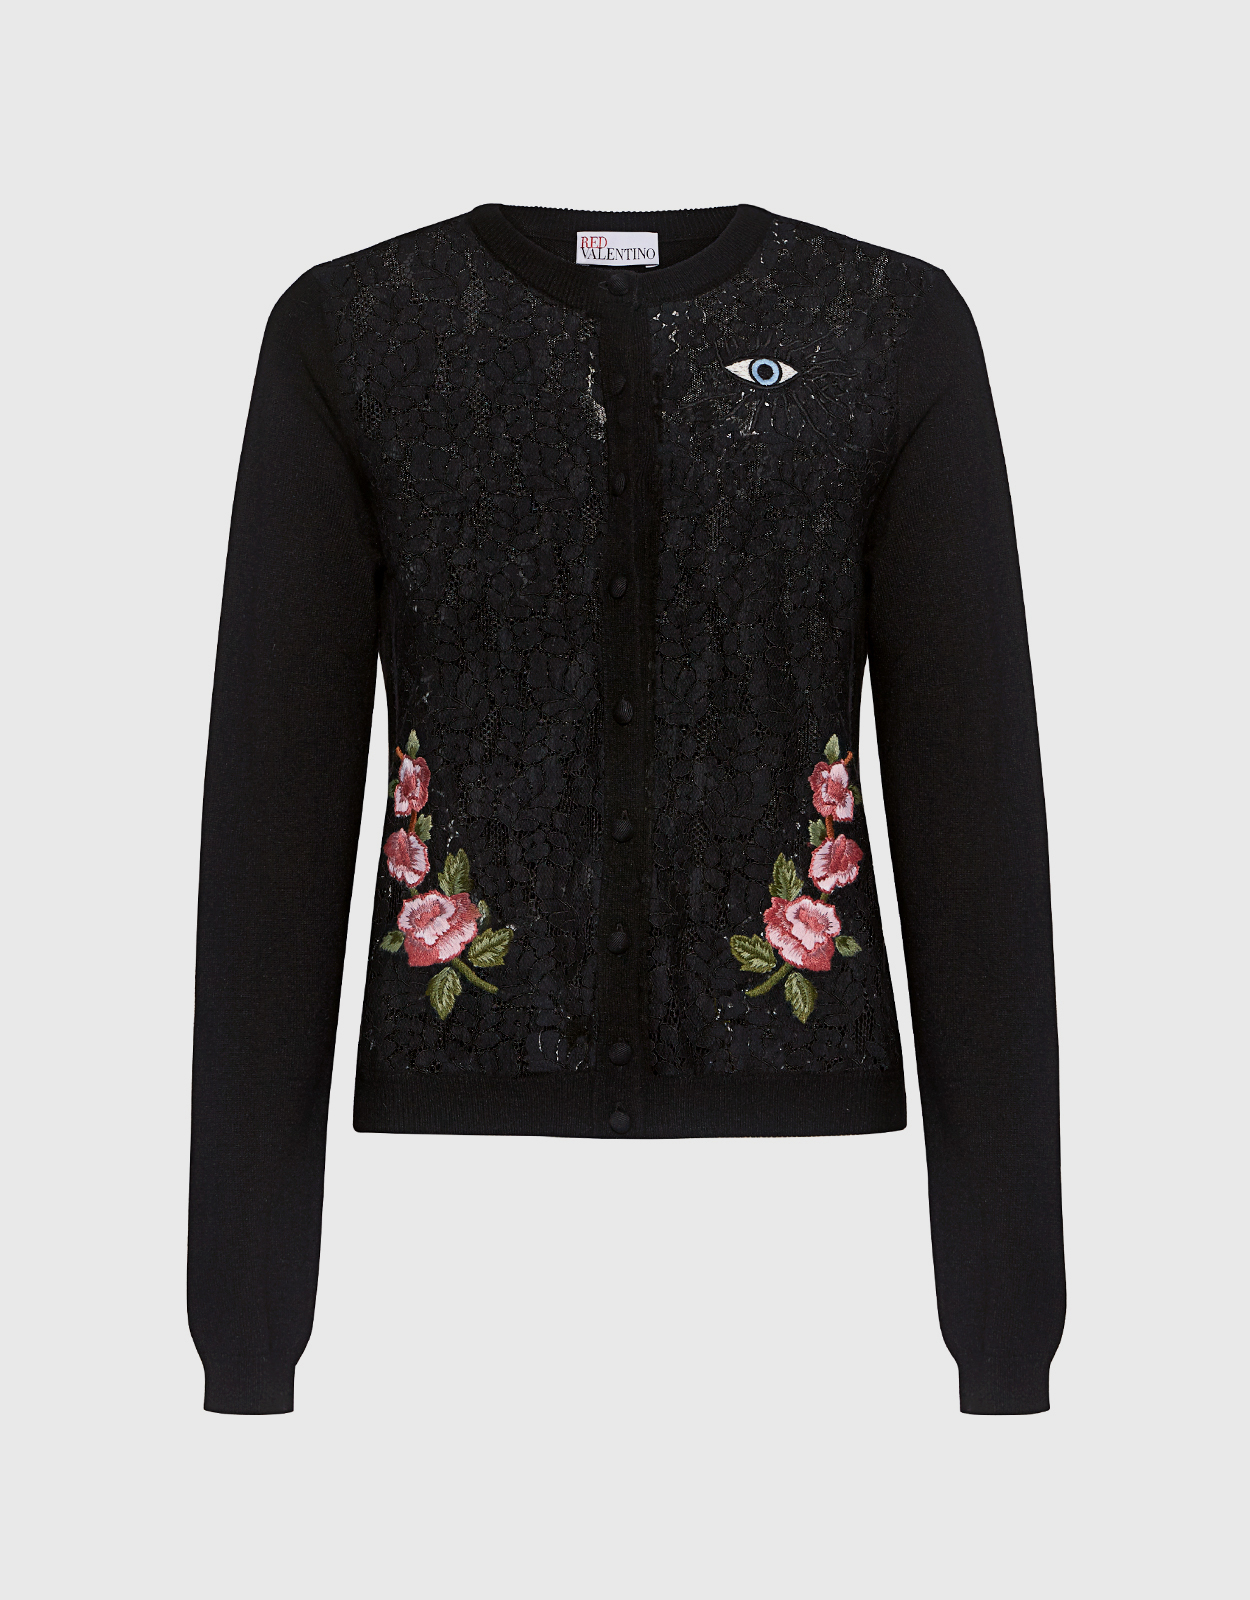 Asien ubemandede Skilt Red Valentino Eye and Floral Embroidered Lace Cardigan (Knitwear,Cardigans)  IFCHIC.COM